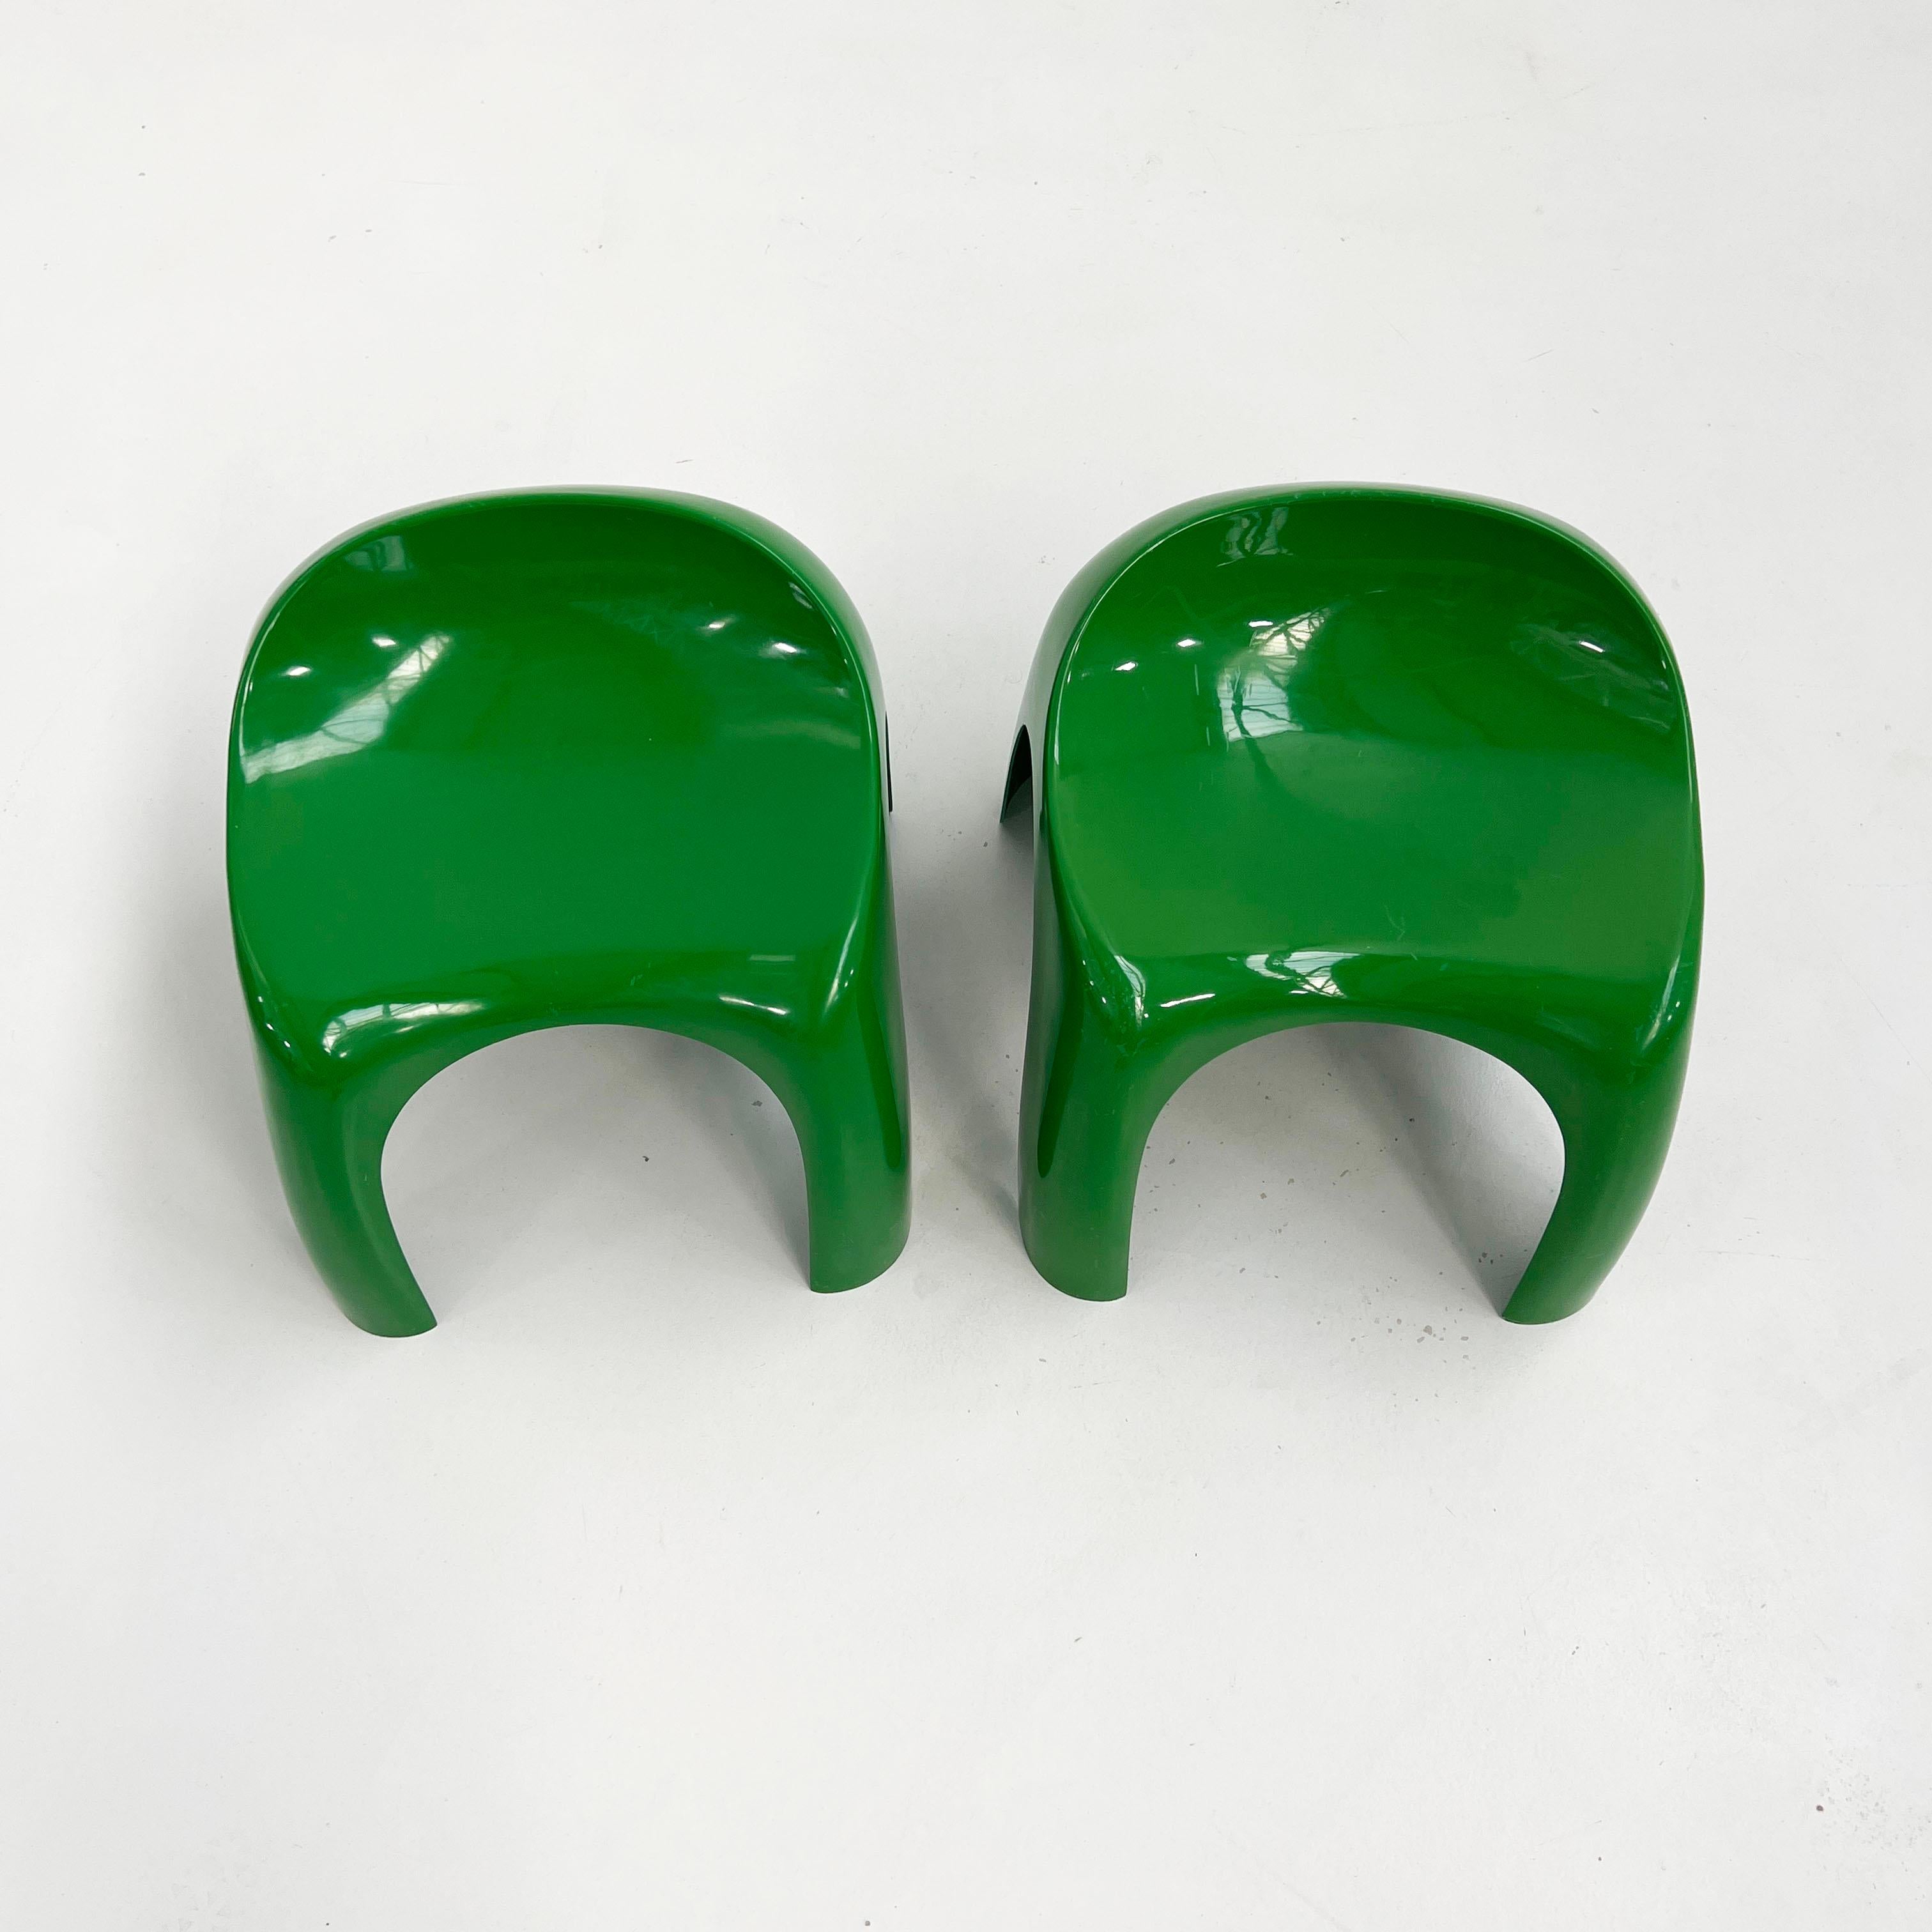 Plastic Pair of Green Efebo Stools by Stacy Dukes for Artemide, 1960s